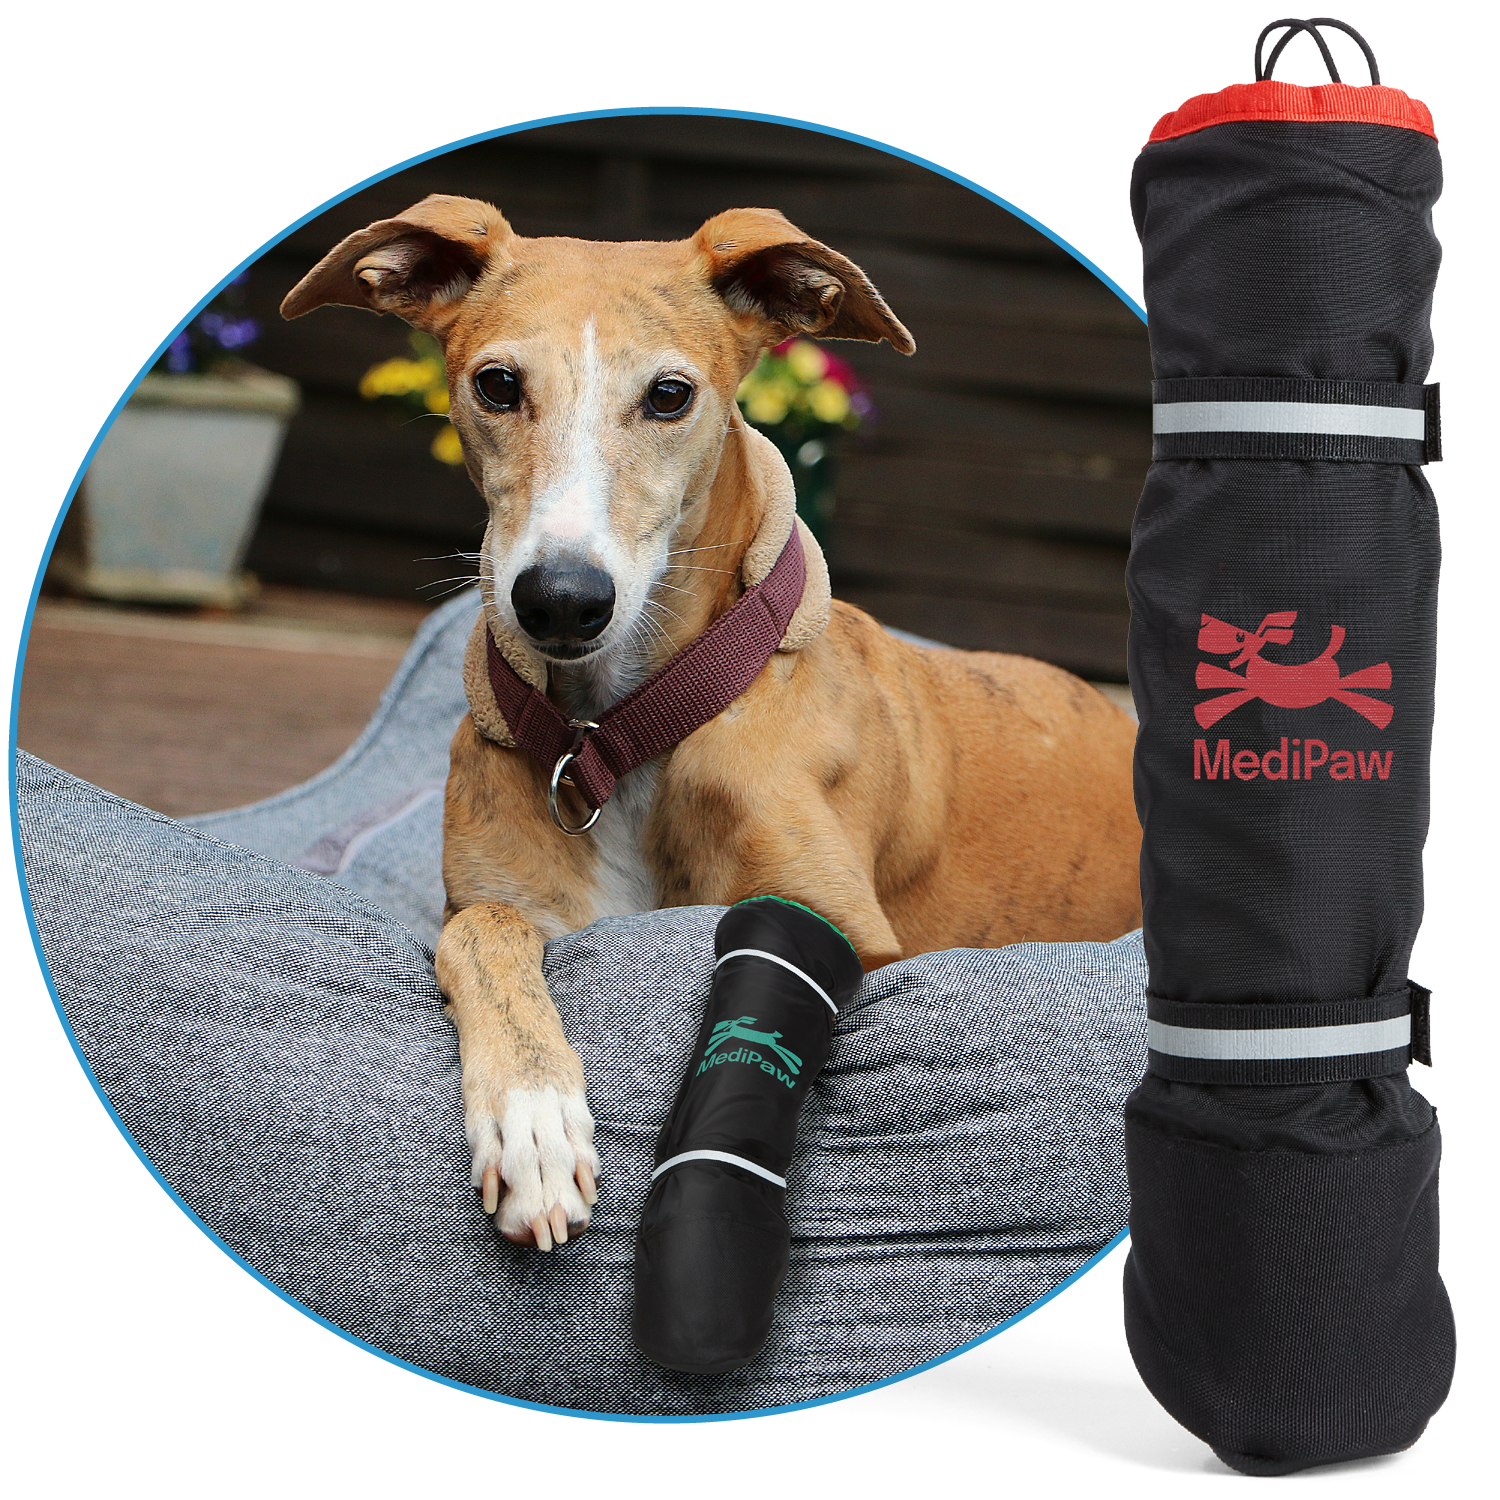 greyhound dog laying in bed wearing protective boot